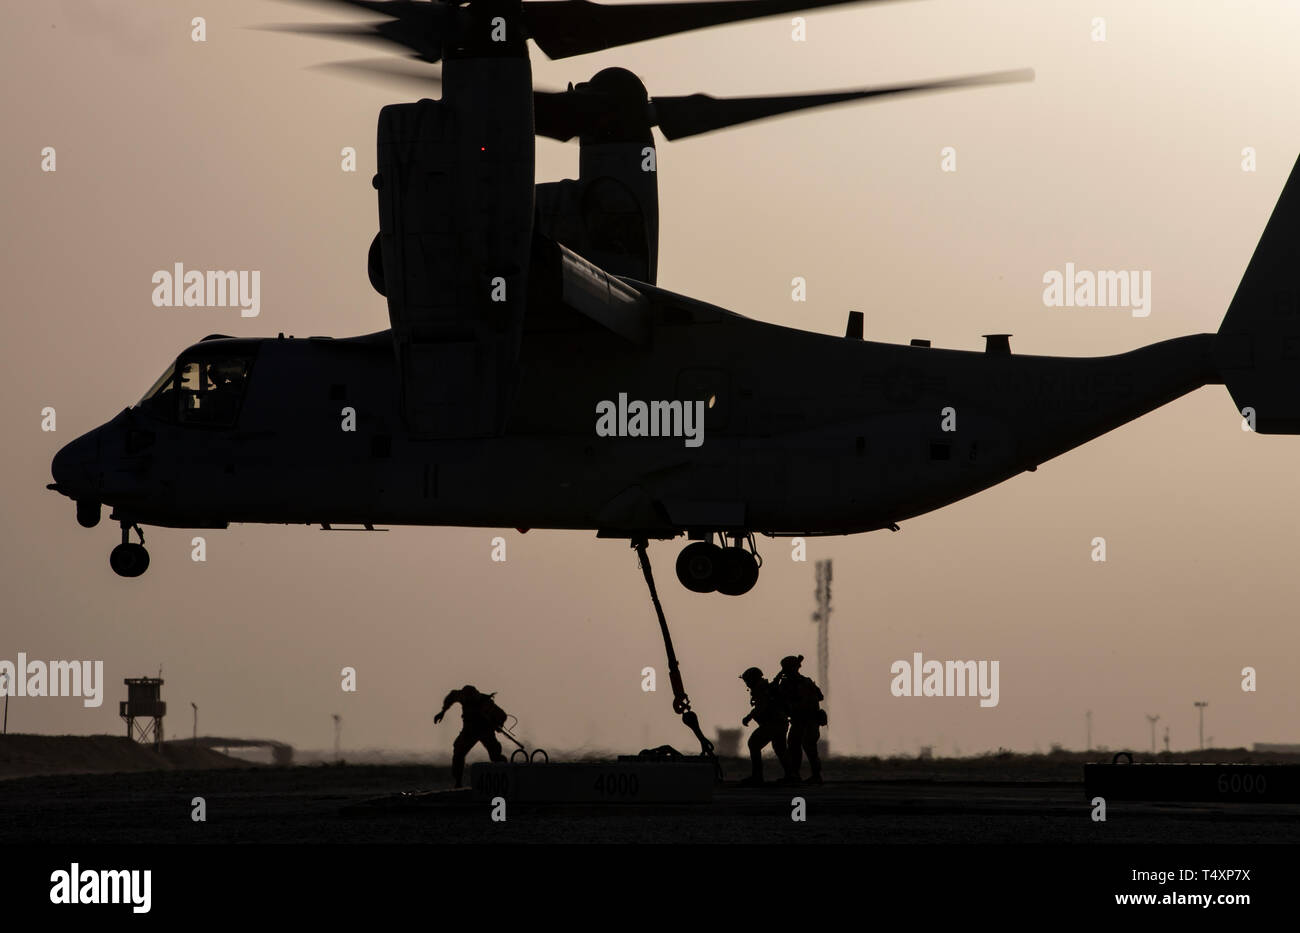 CAMP BEUHRING, Kuwait (April 11, 2019) A U.S. Marine MV-22 Osprey hovers while landing support specialists with the 22nd Marine Expeditionary Unit hook a 1,500 pound beam as part of helicopter support team training during Marine Expeditionary Unit Exercise. The Marines, with Marine Medium Tiltrotor Squadron 264 (Reinforced) and Combat Logistics Battalion 22, participated the training to build and sharpen their skills in order to maintain combat readiness. Marines and Sailors with the 22nd MEU and Kearsarge Amphibious Ready Group are currently deployed to the U.S. 5th Fleet area of operations i Stock Photo